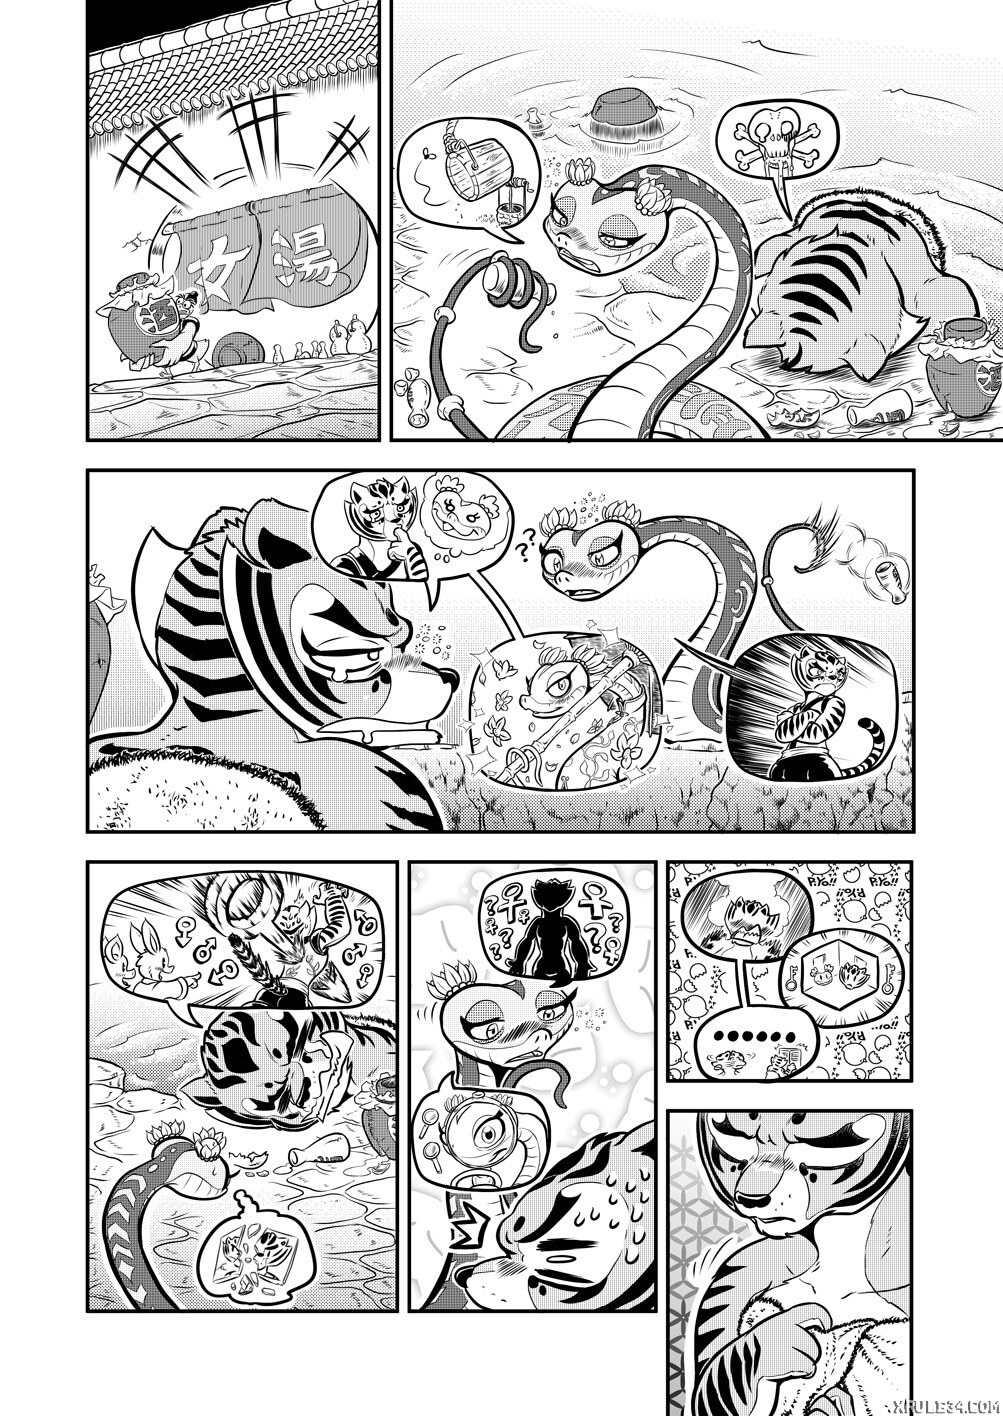 The Tiger Lilies in Bloom - Page 4